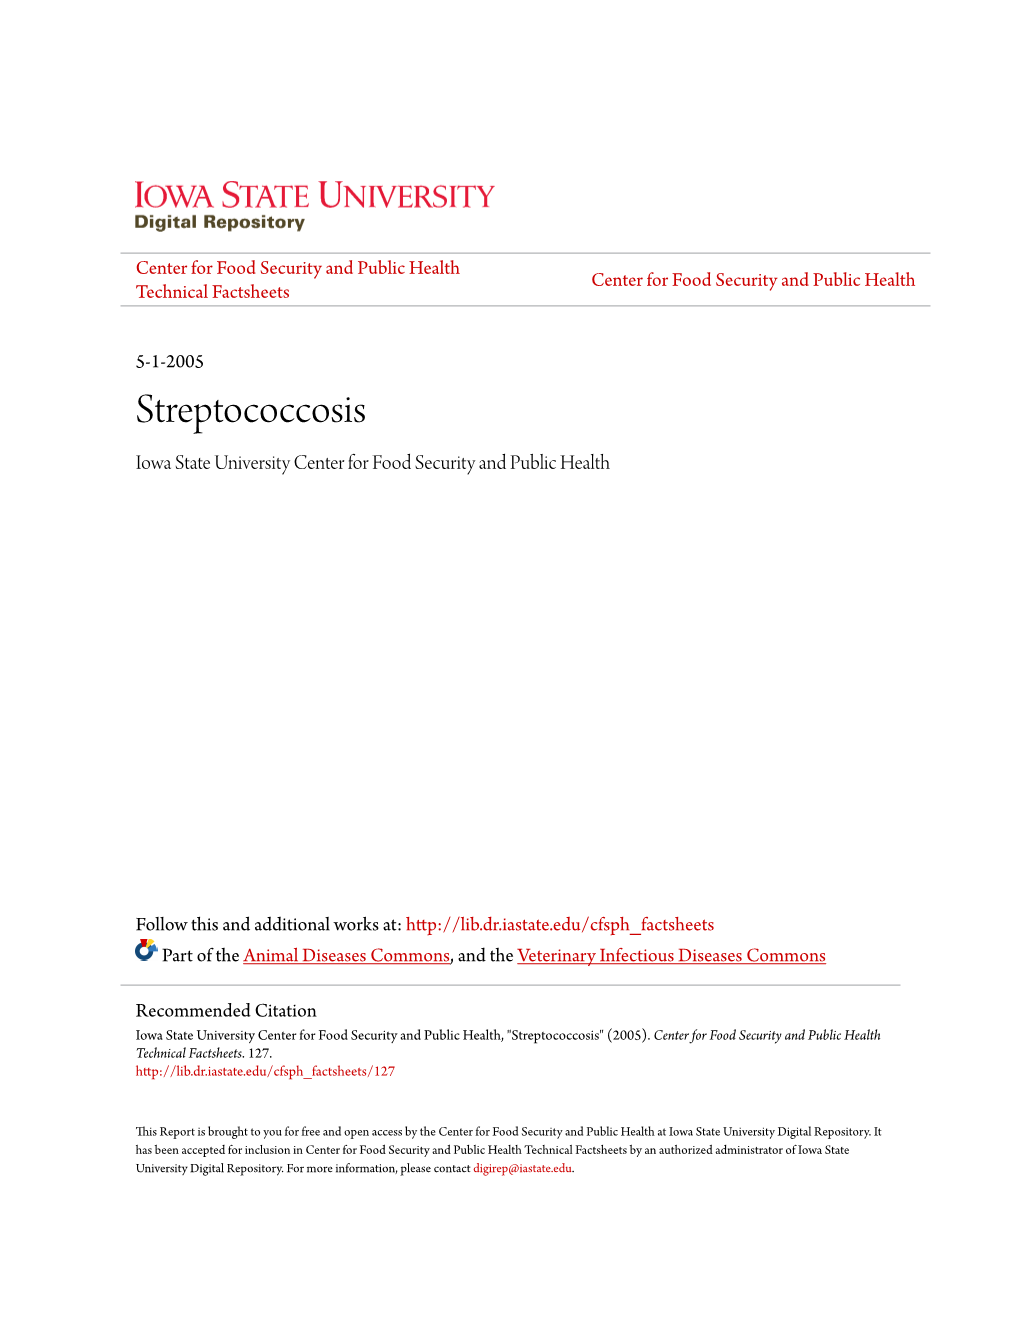 Streptococcosis Iowa State University Center for Food Security and Public Health